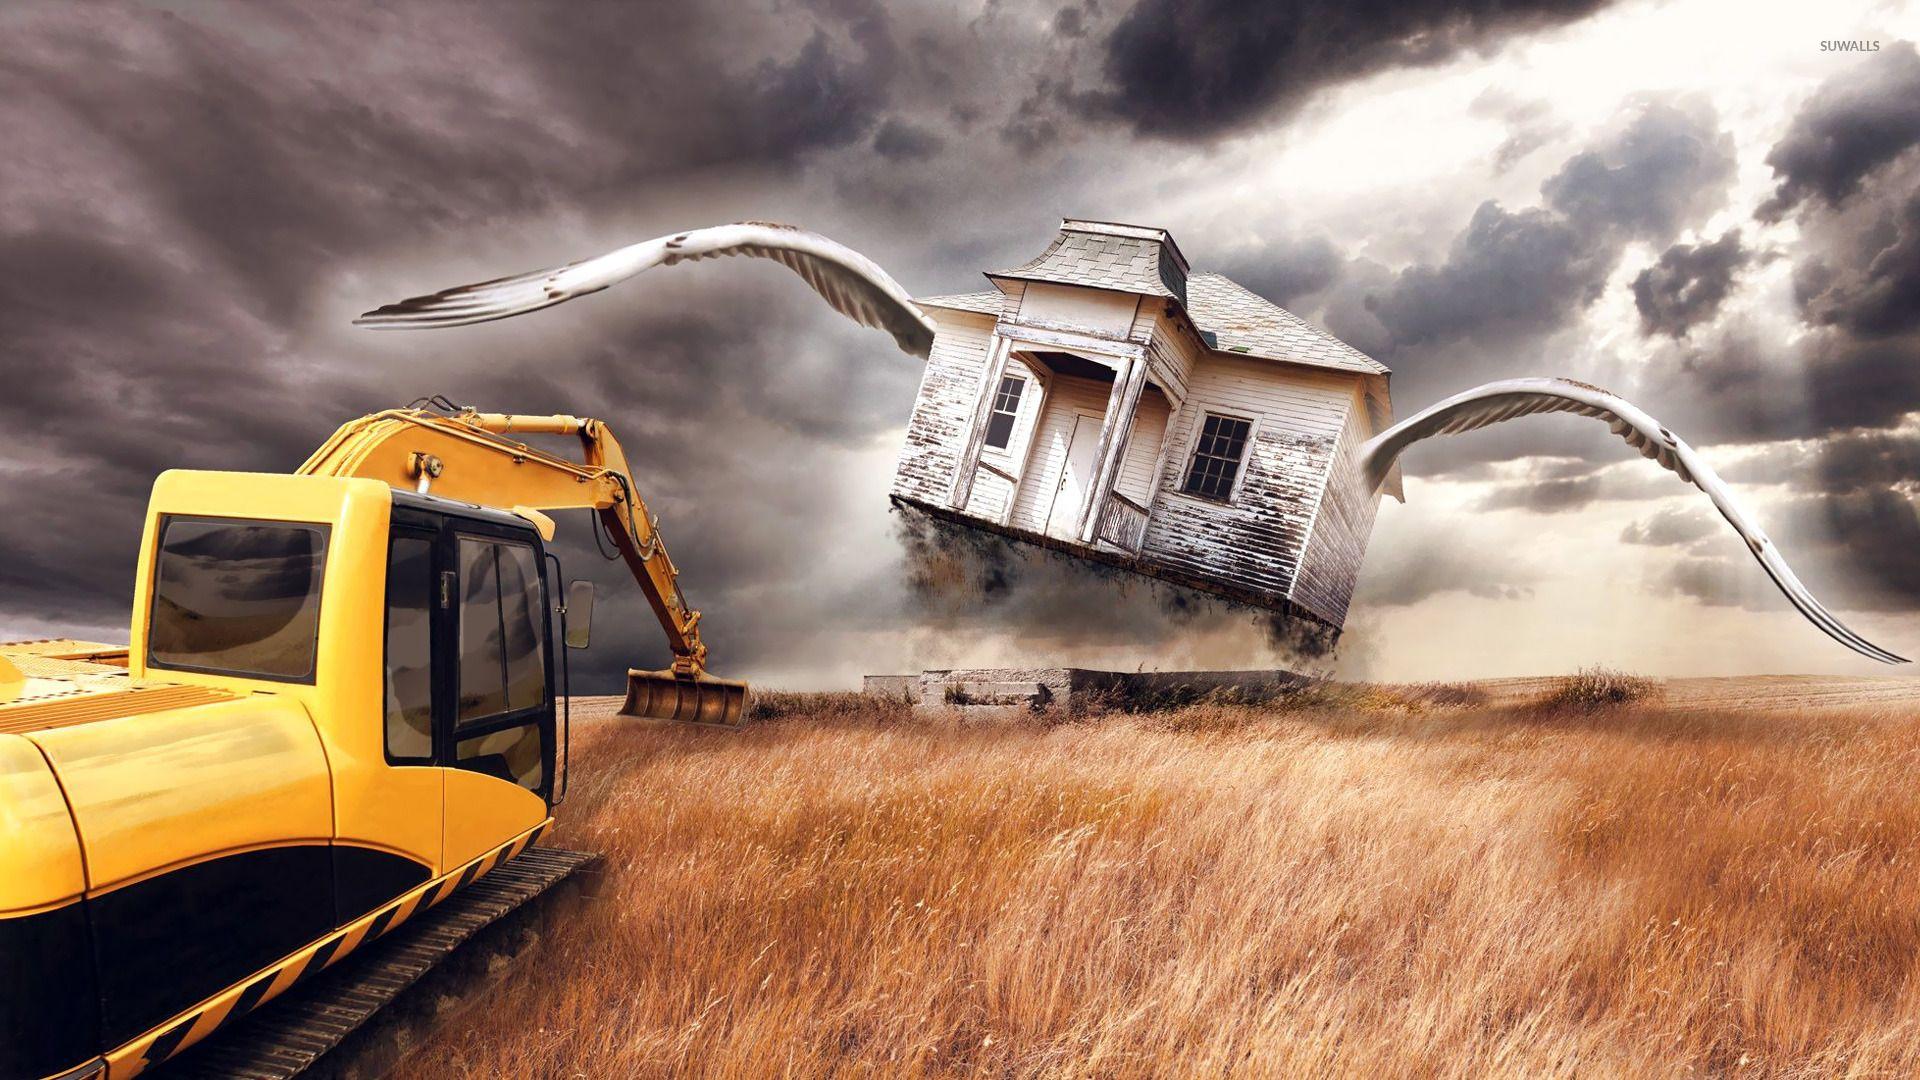 Excavator and a house with wings wallpaper wallpaper